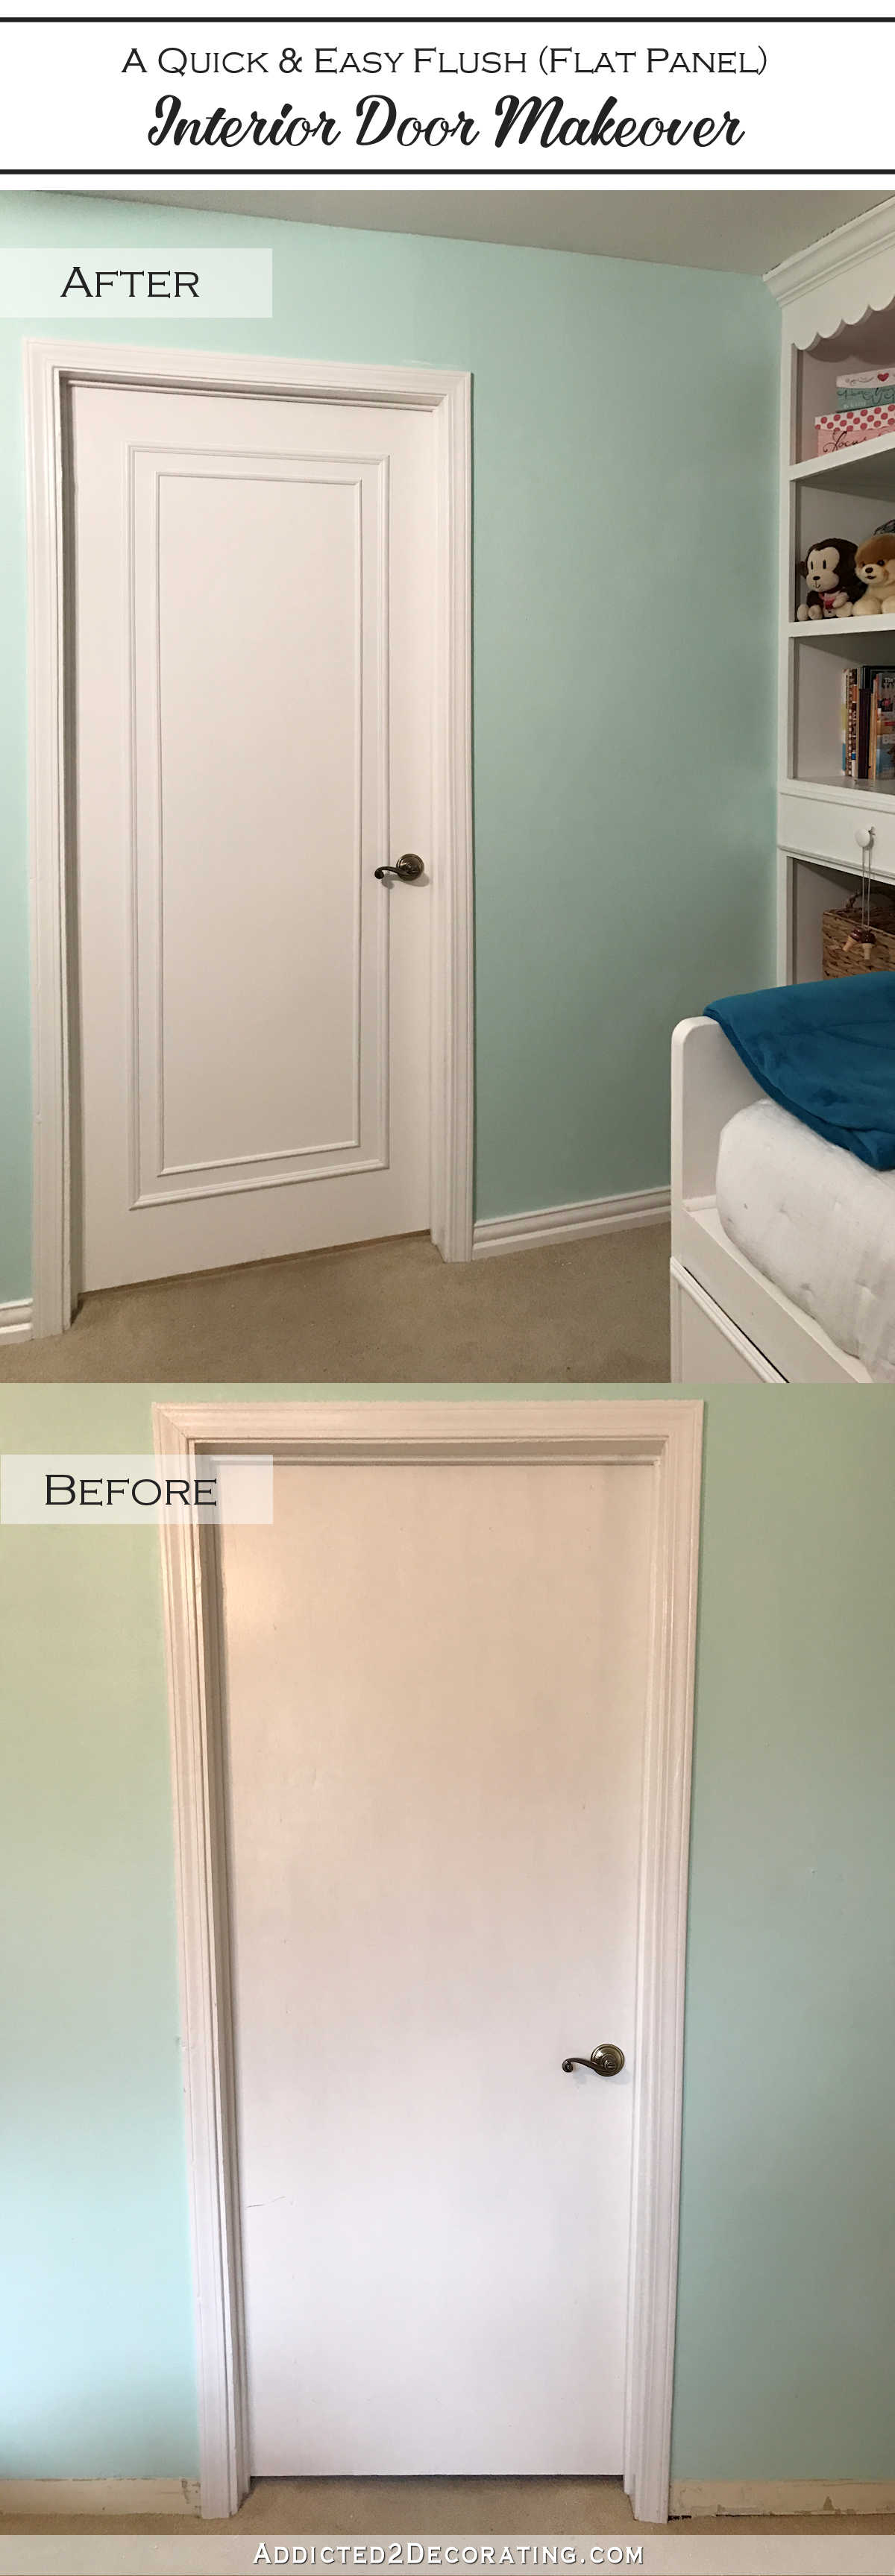 how to update flush interior doors with molding - before and after